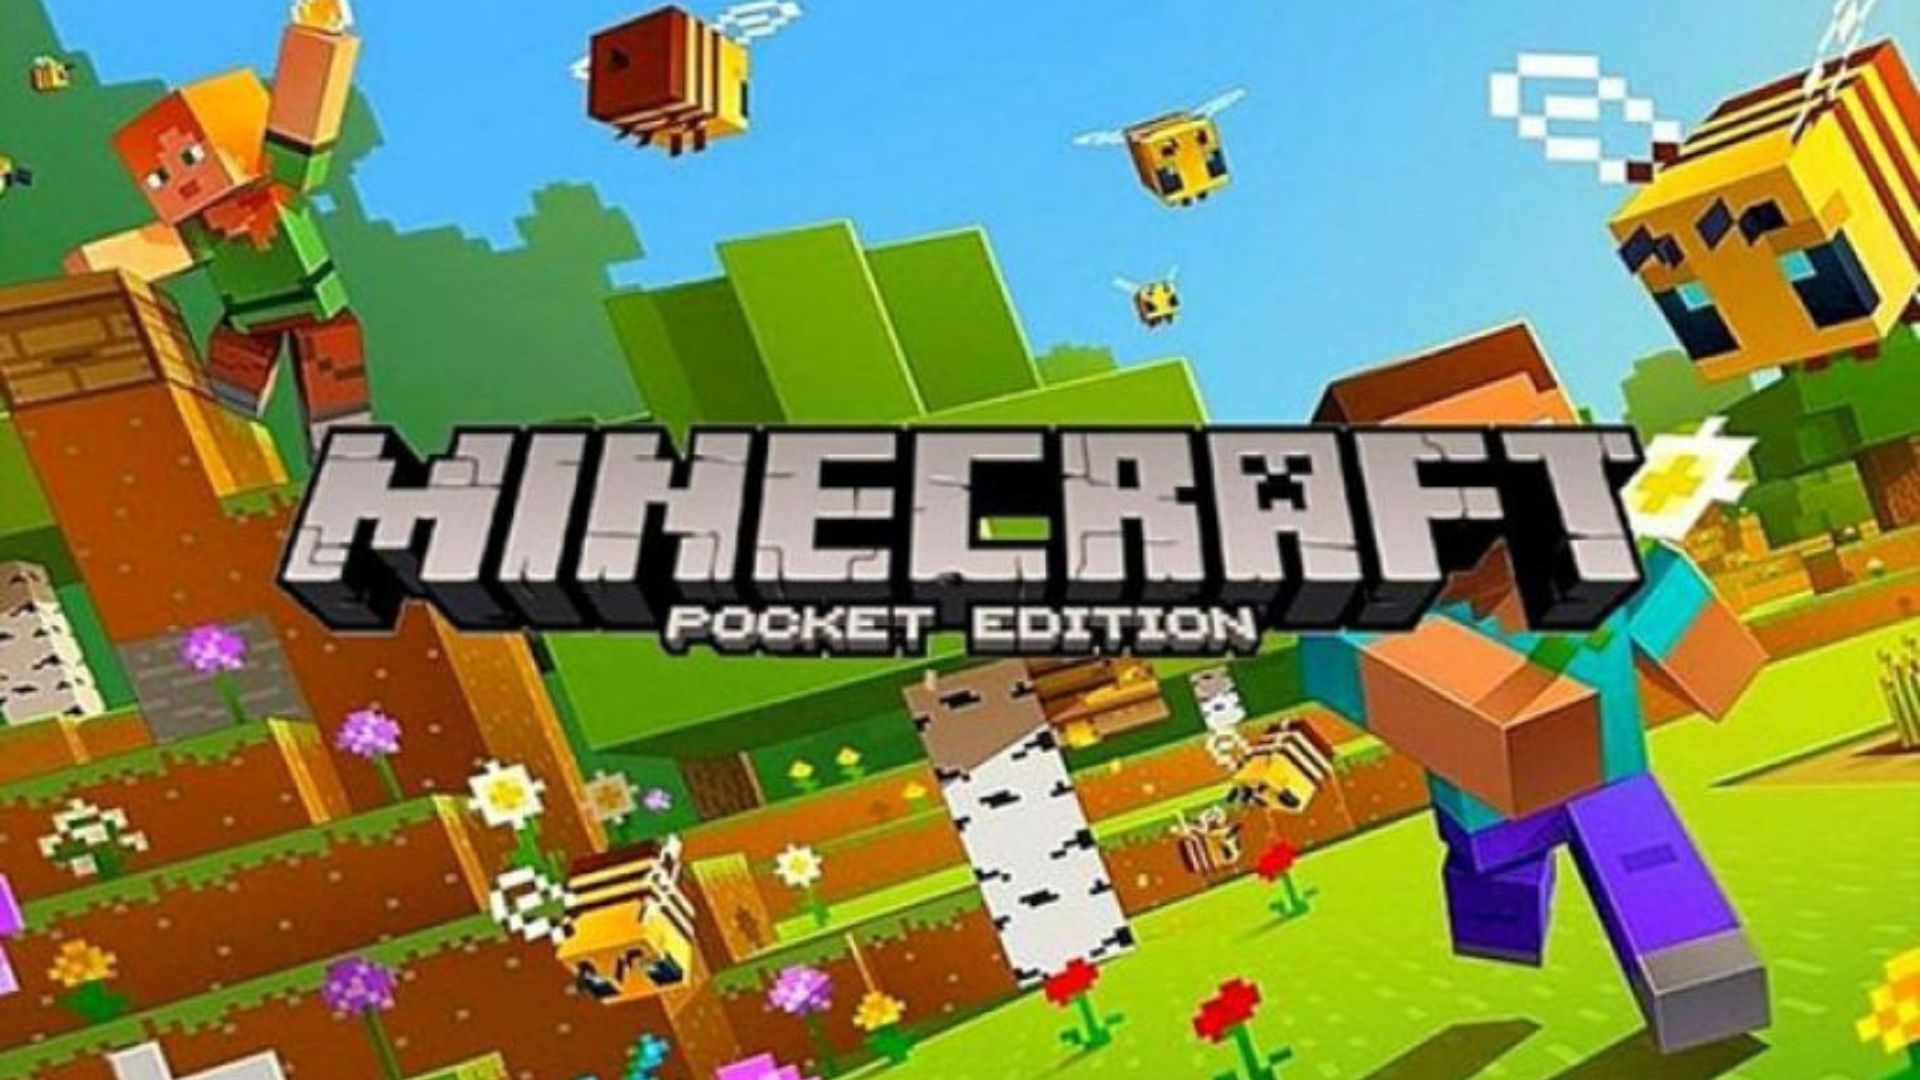 Cara Install Game Minecraft Pocket Edition di Iphone dan Android